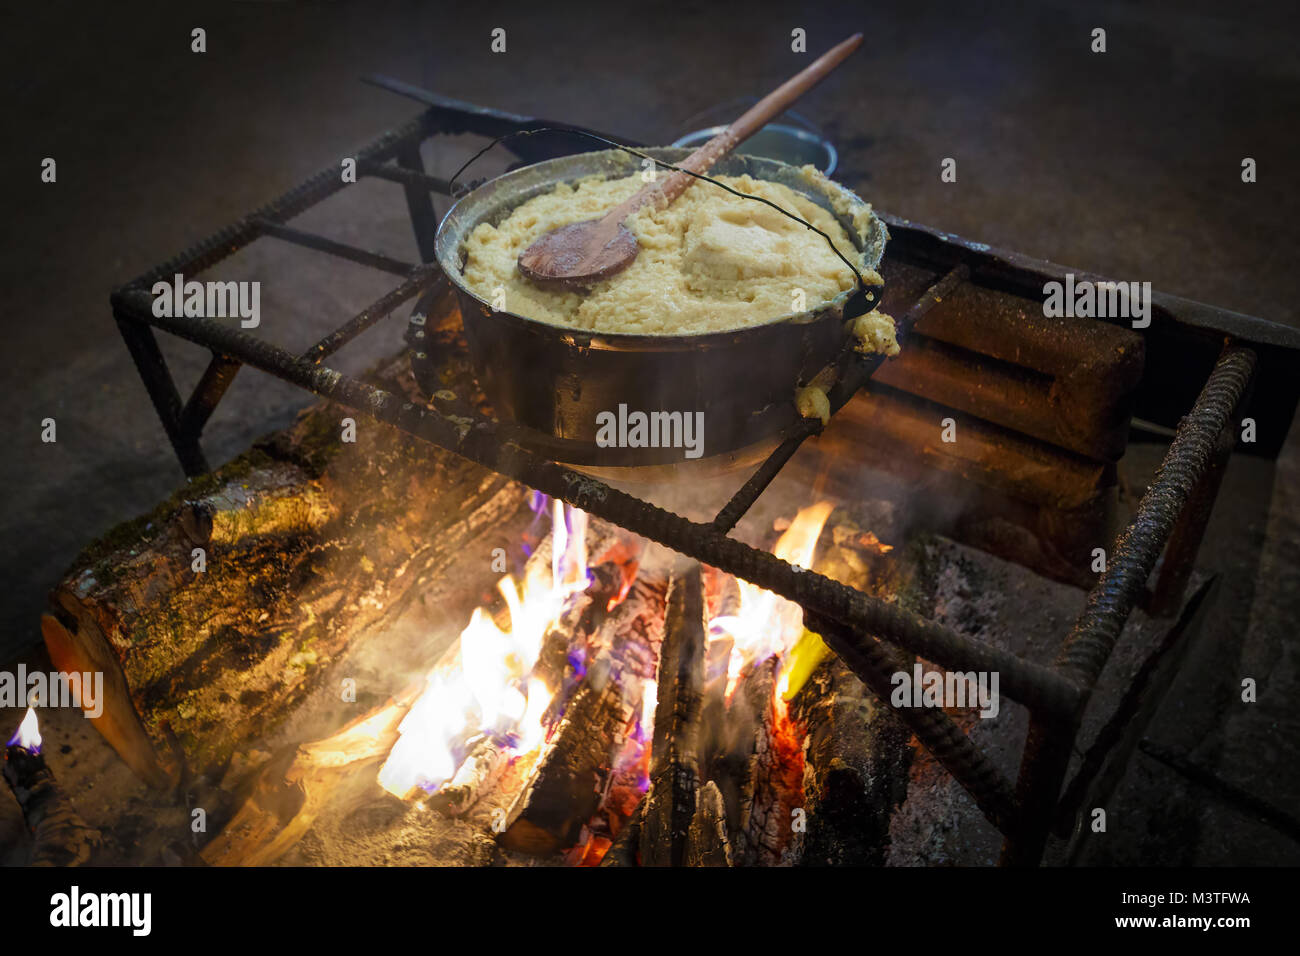 Traditional georgian food, hominy (mamaliga) is cooked in the large cooking pot on fire Stock Photo